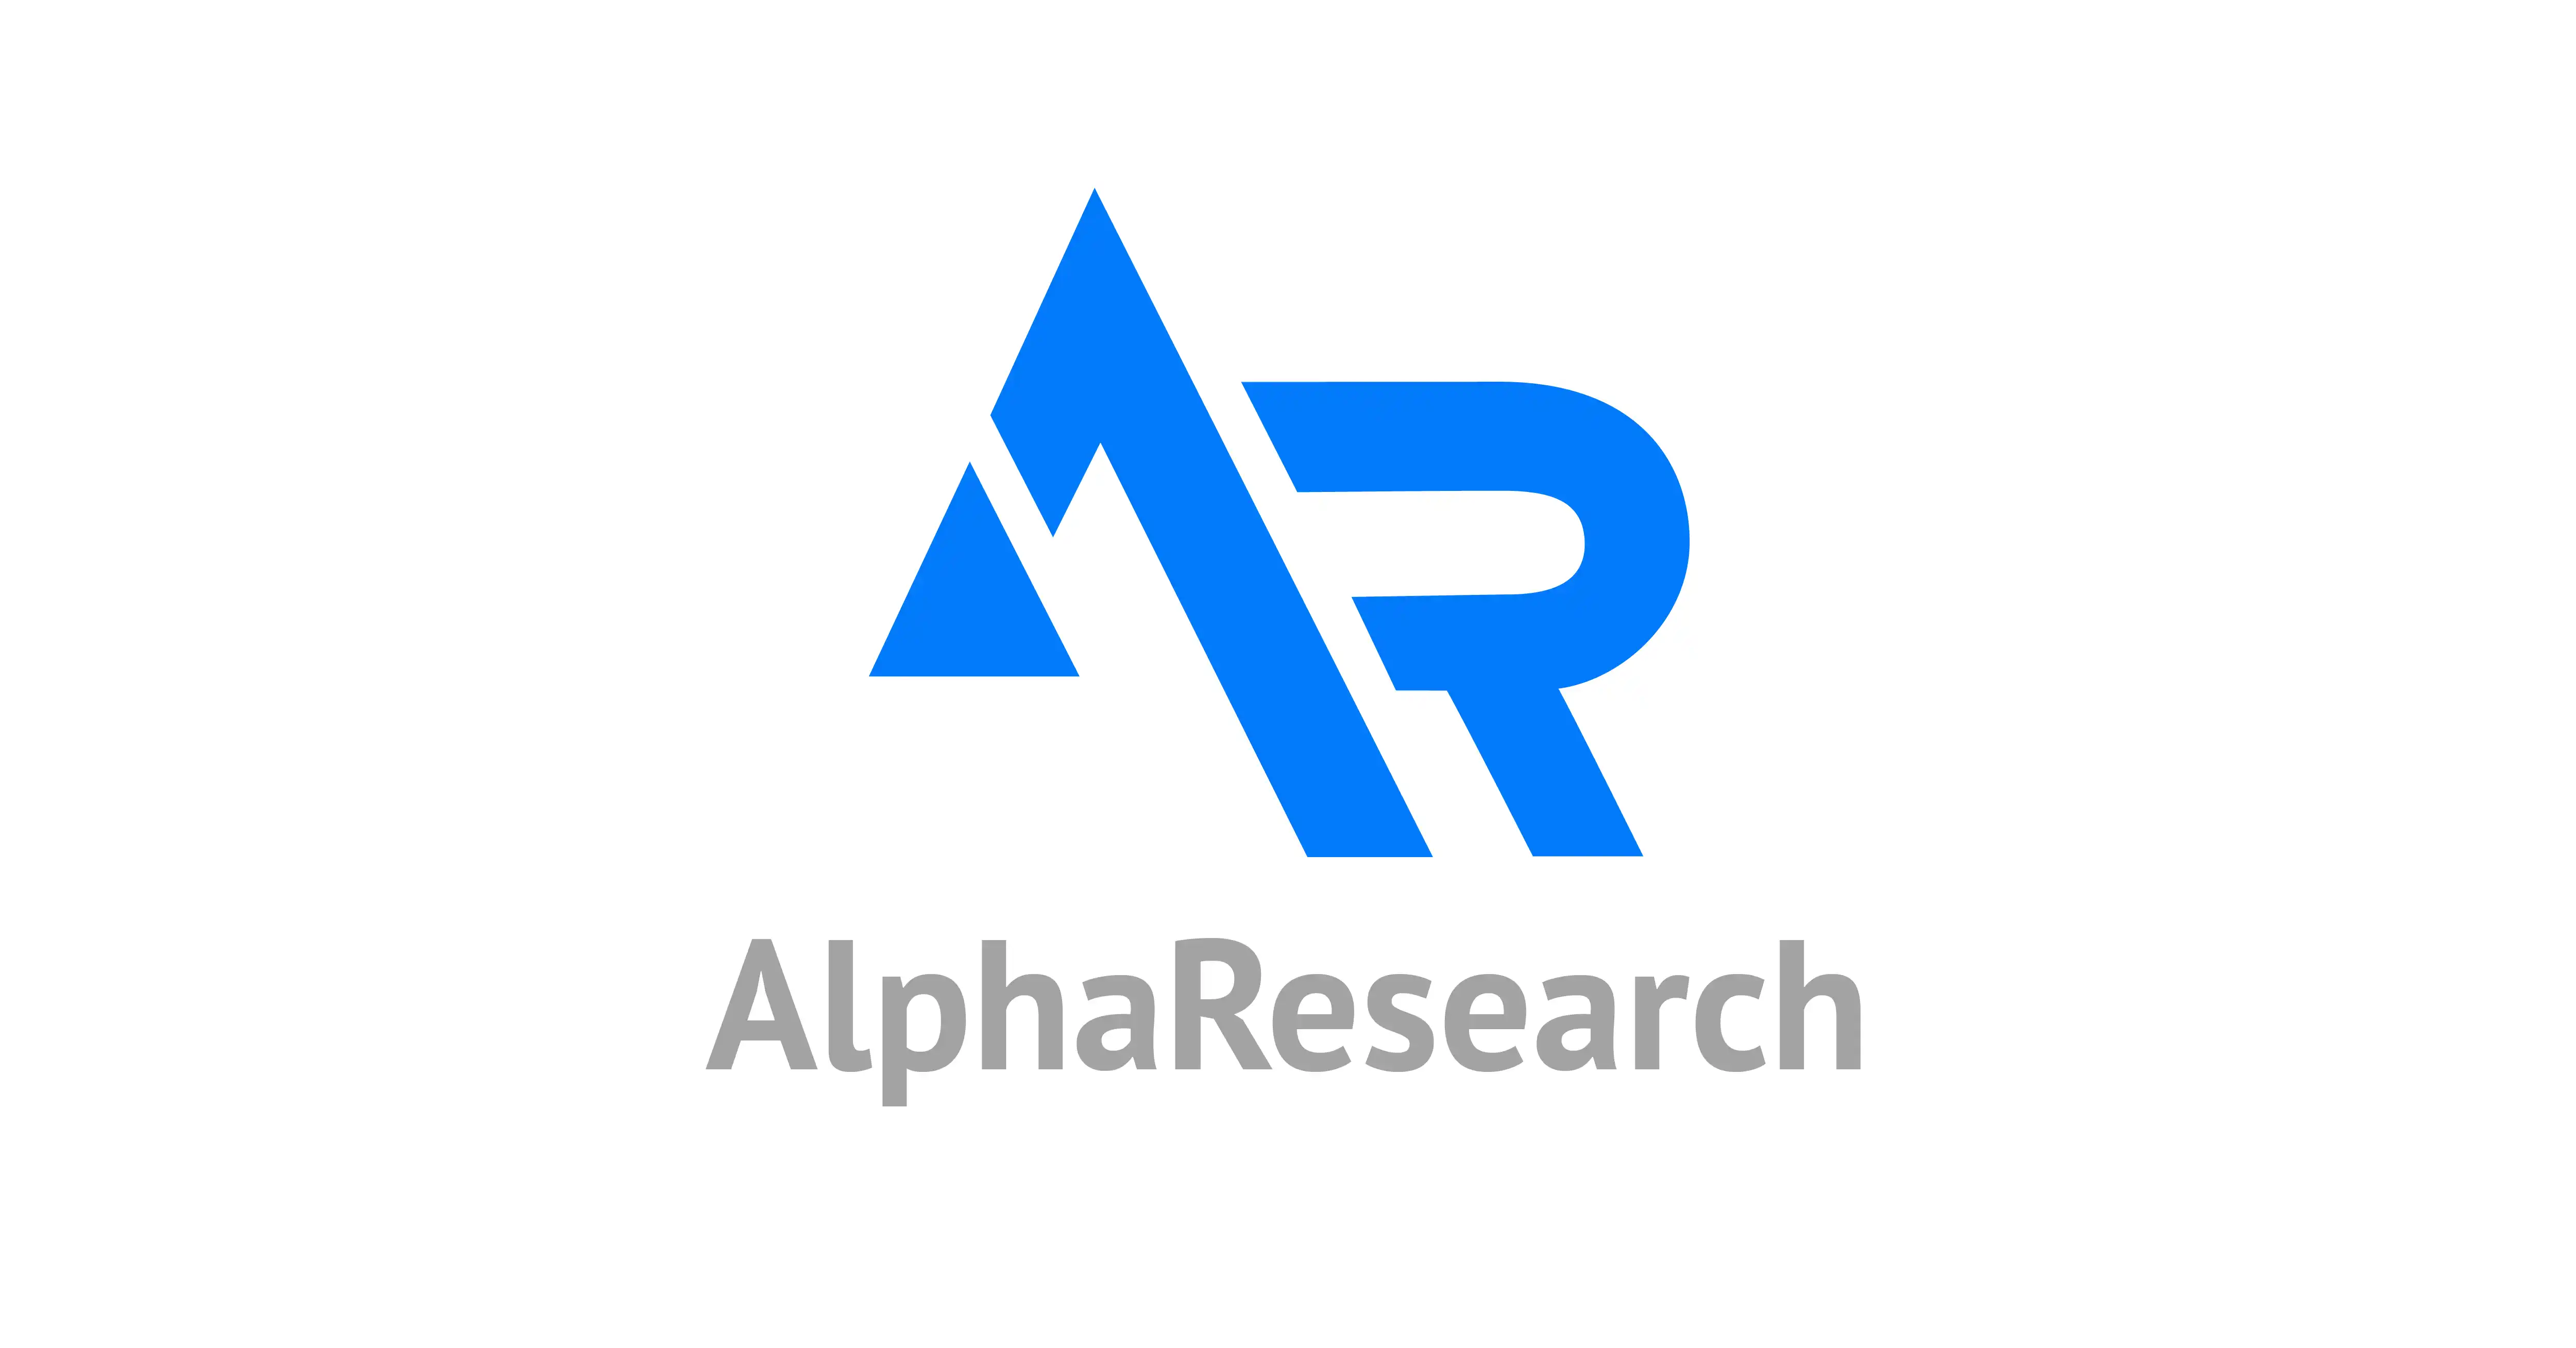 AlphaResearch - A platform for investors to analysis and visualization